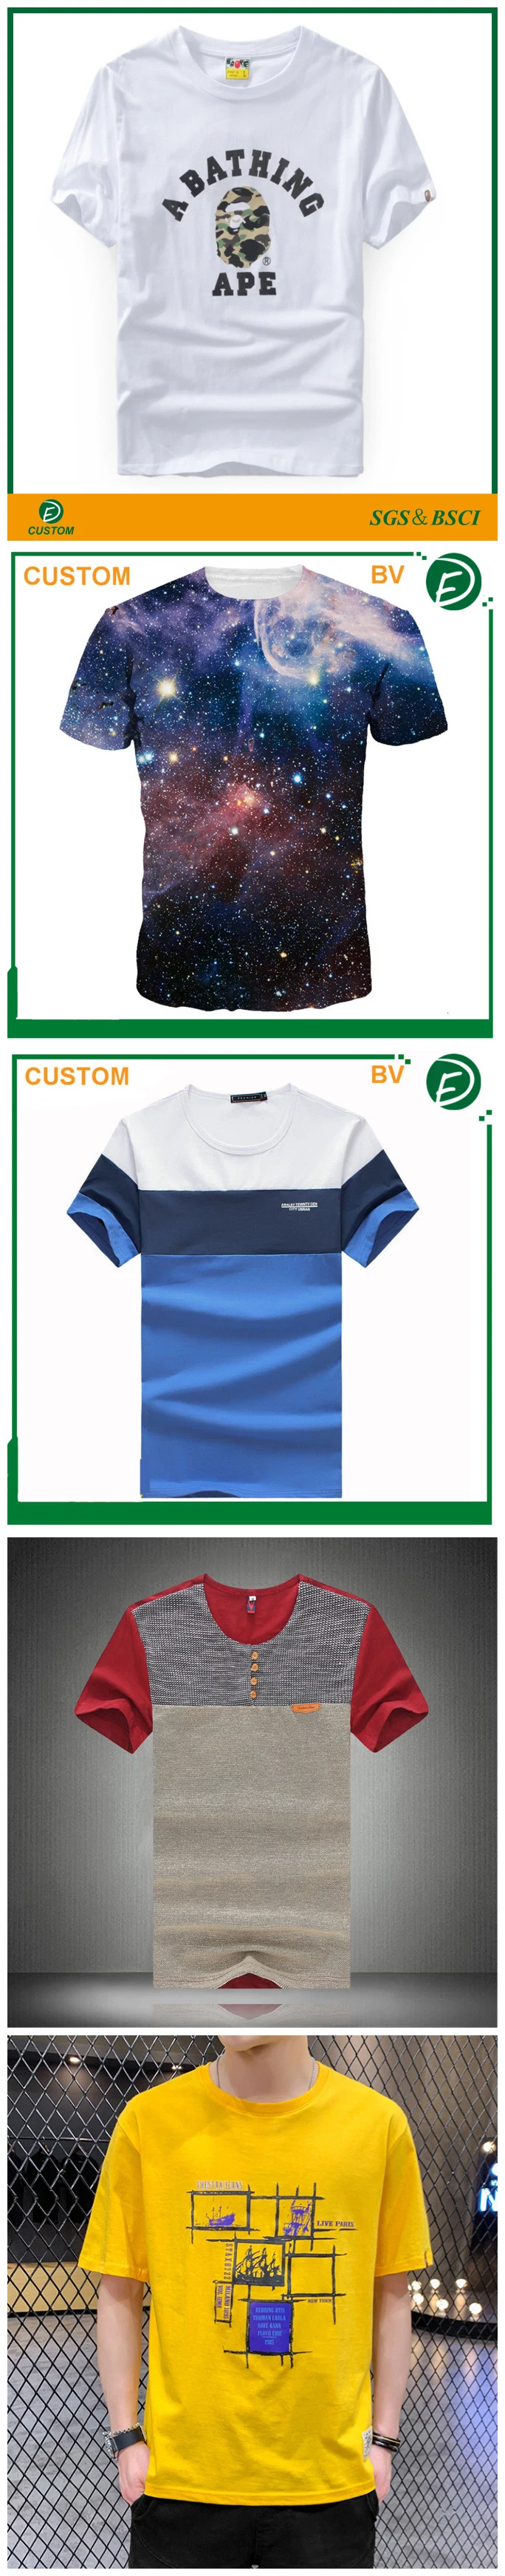 Custom/Customized Fashion Clothes Wholesale Plain/Blank/Printing/Printed Wholesale Apparel 100% Cotton/Bamboo/Polyester Men&prime; S Golf Tee Shirt